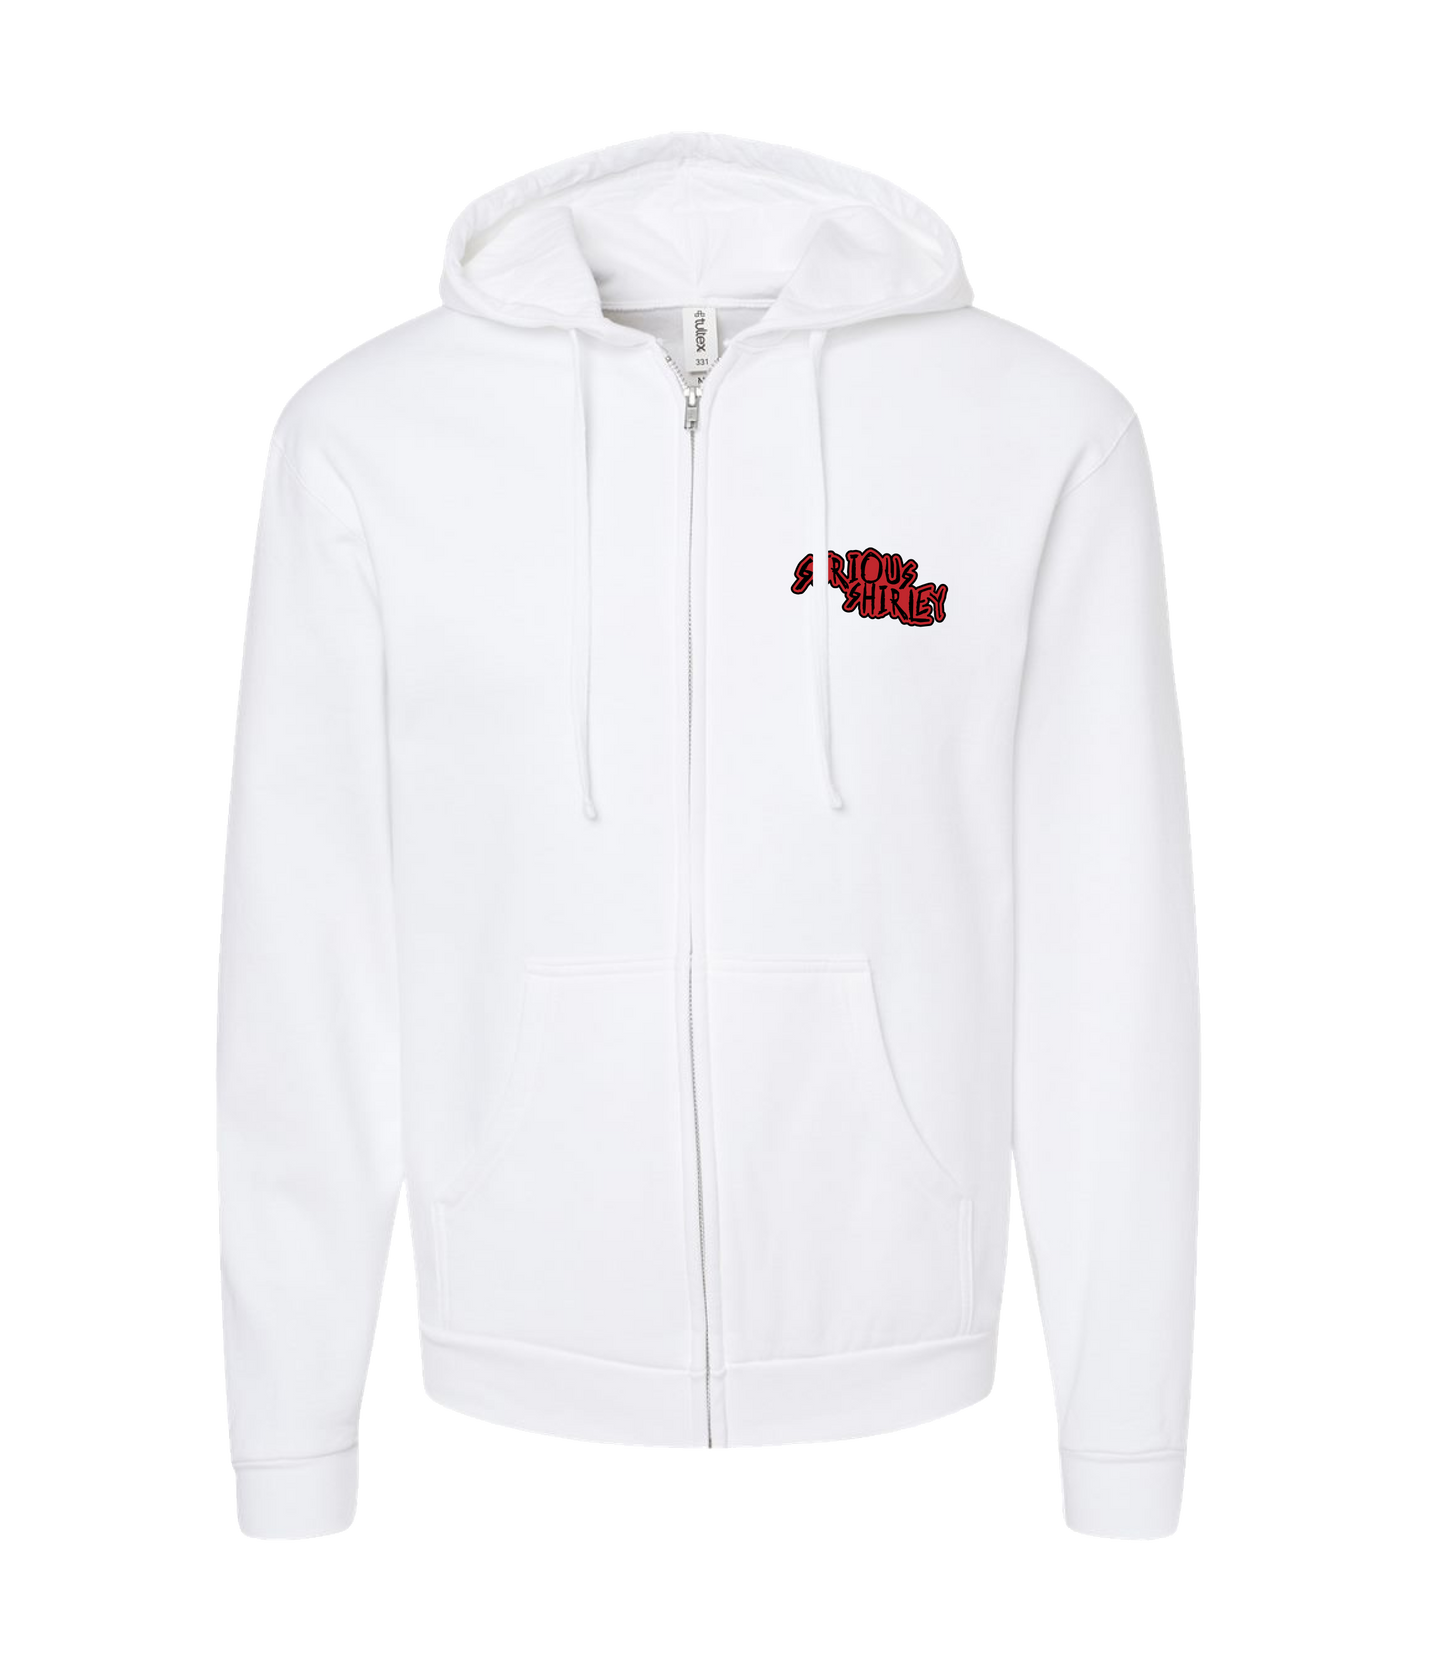 Serious Shirley - Red Scratch - White Zip Up Hoodie